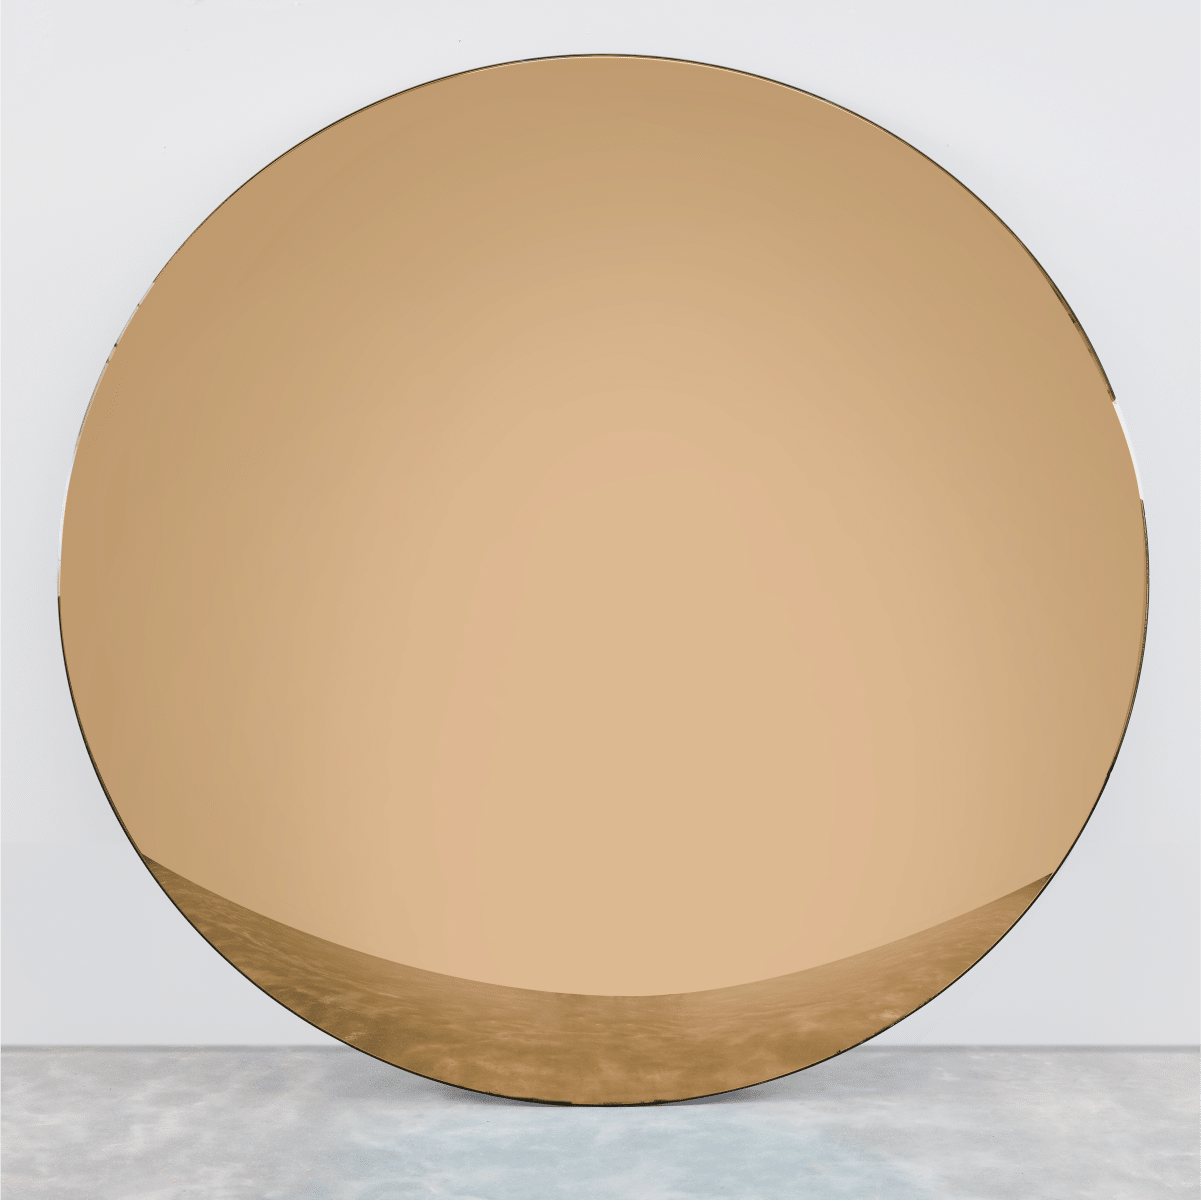 Low res for web_Convex Mirror in Rose Gold